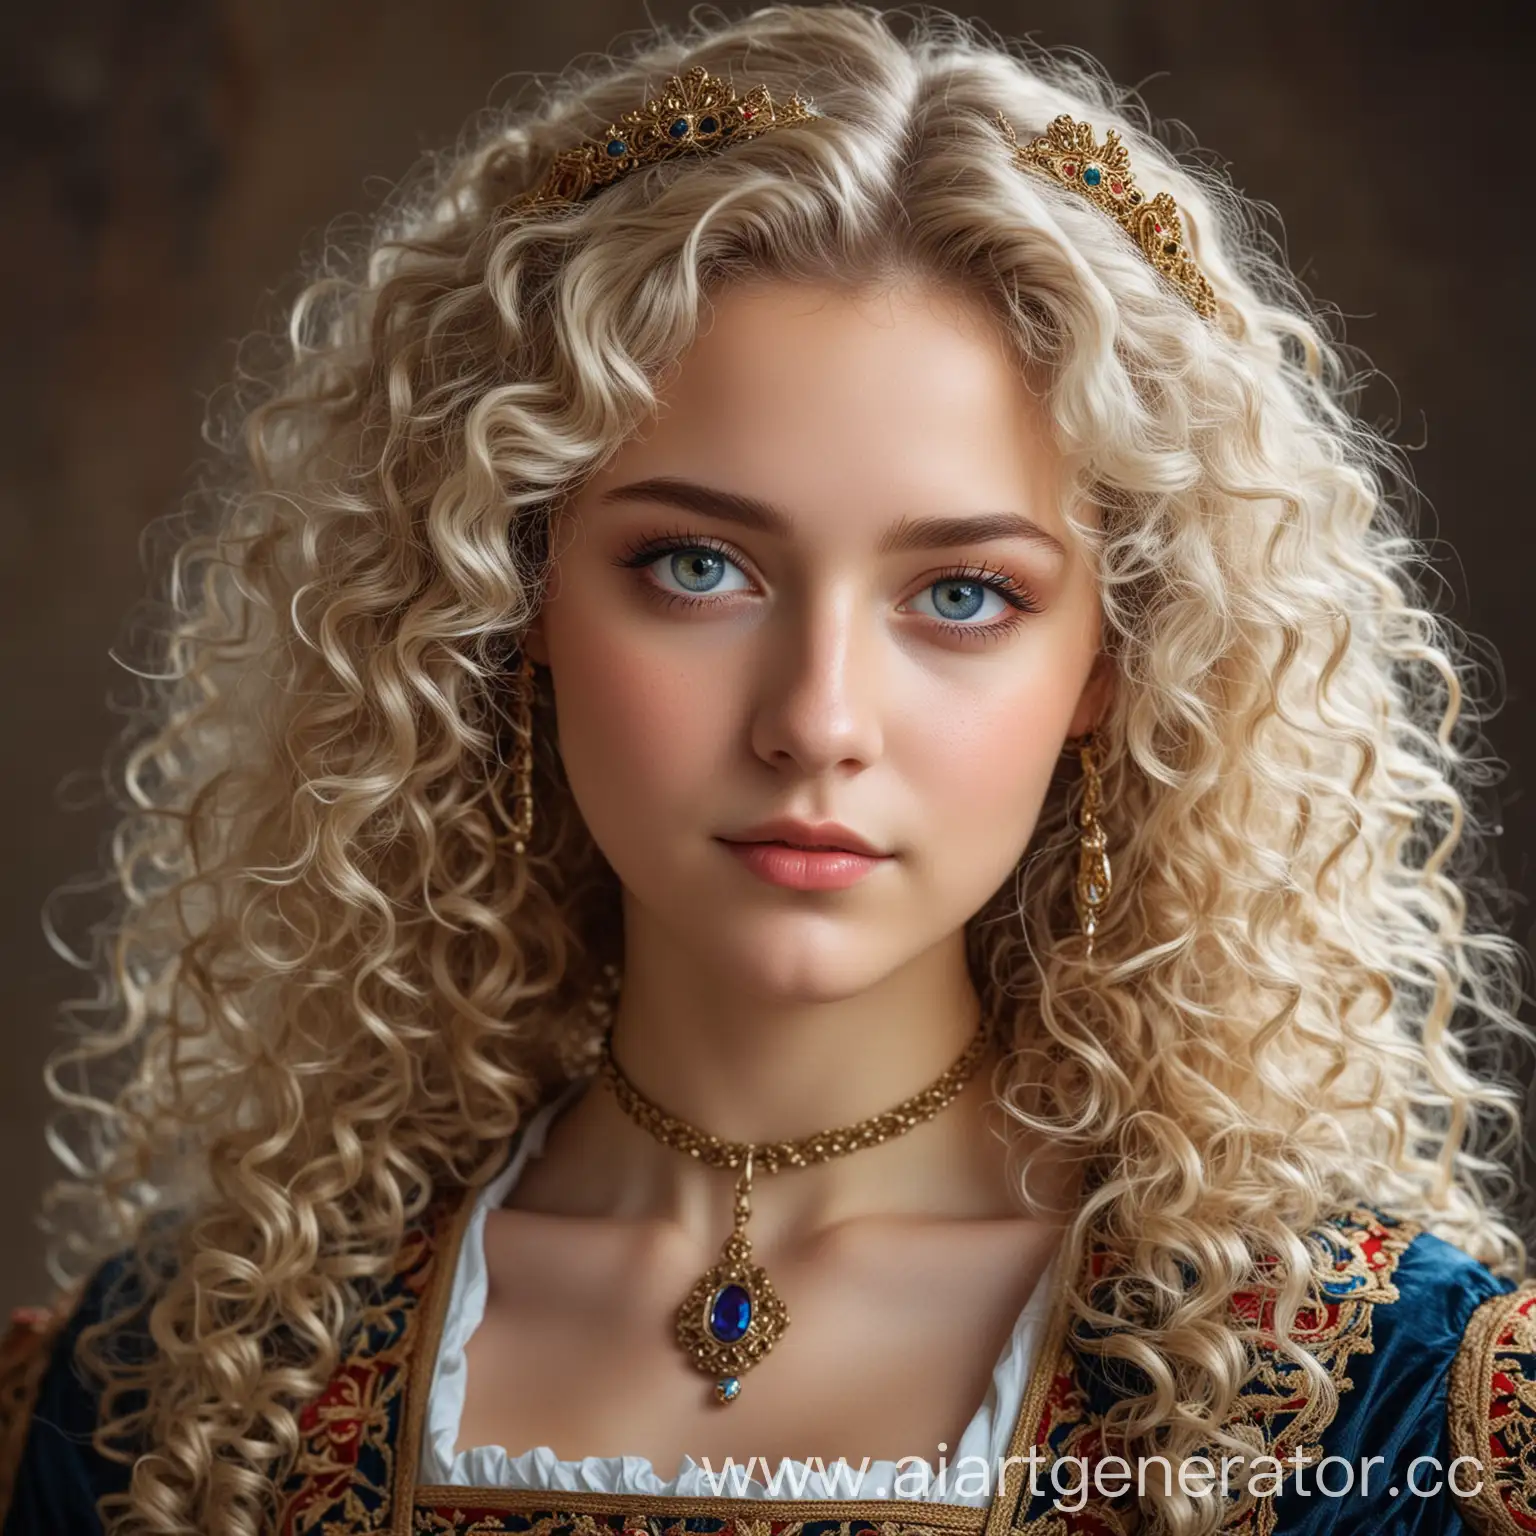 Medieval-Aristocratic-Girl-with-Multicolored-Eyes-in-Elegant-Attire